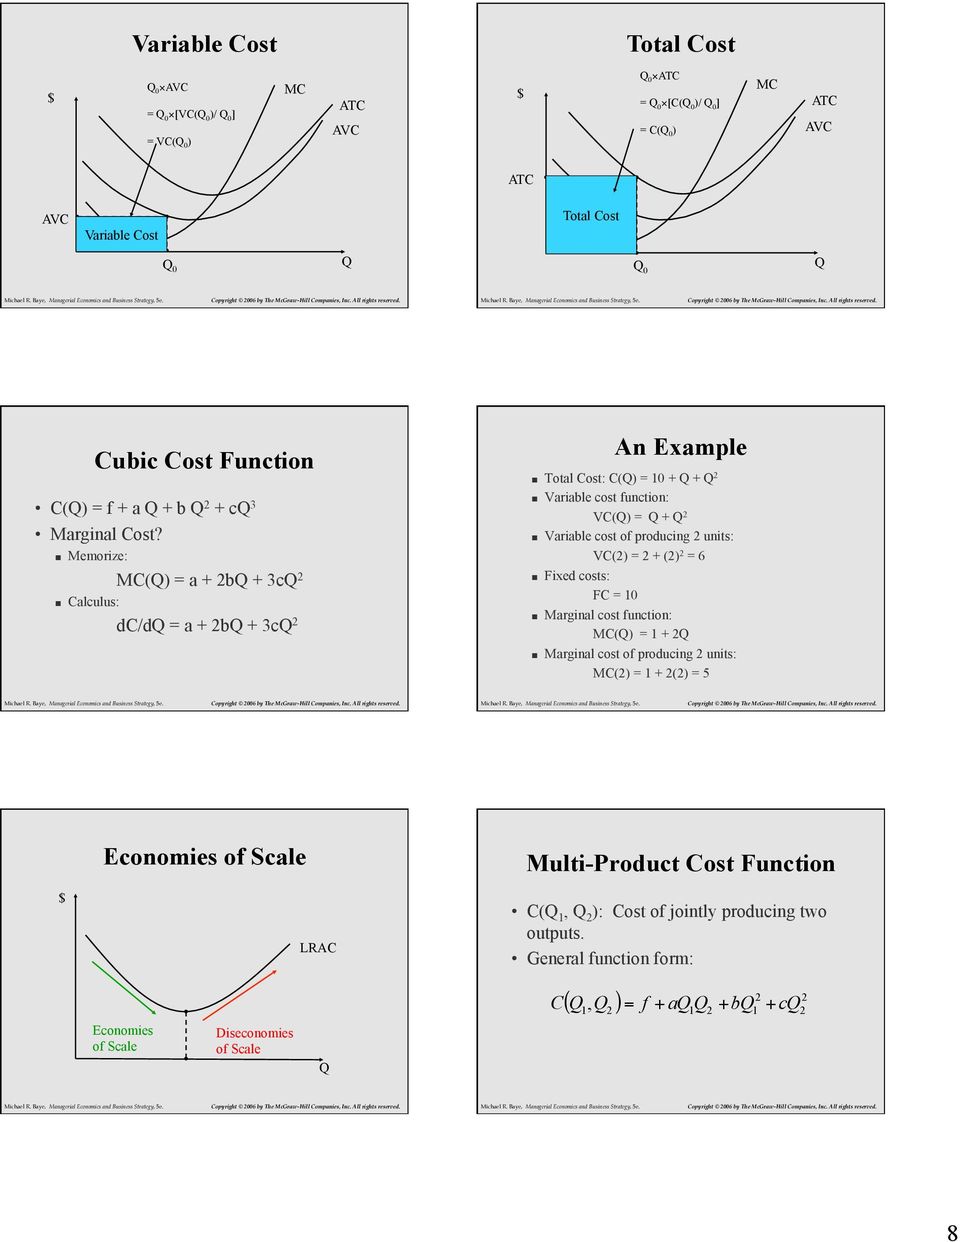 units: V(2) = 2 + (2) 2 = 6 Fixed costs: F = 1 Marginal cost function: M() = 1 + 2 Marginal cost of producing 2 units: M(2) = 1 + 2(2) = 5 Economies of Scale R